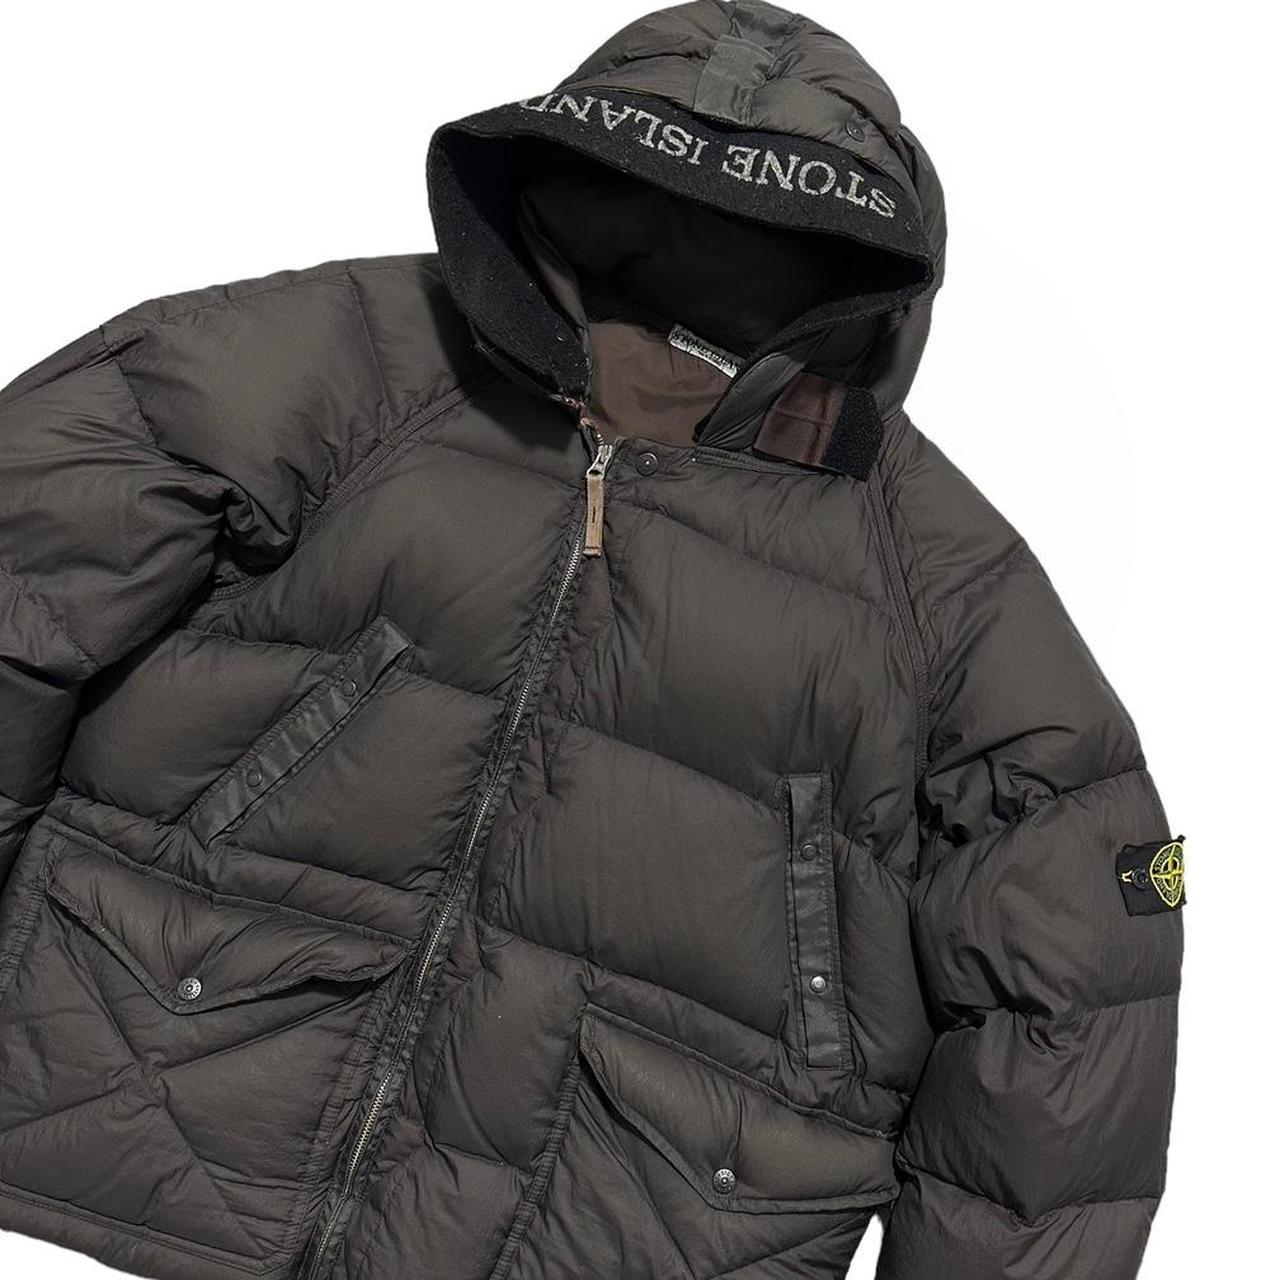 Stone Island 2007 Opaque Tela Down Jacket - Known Source